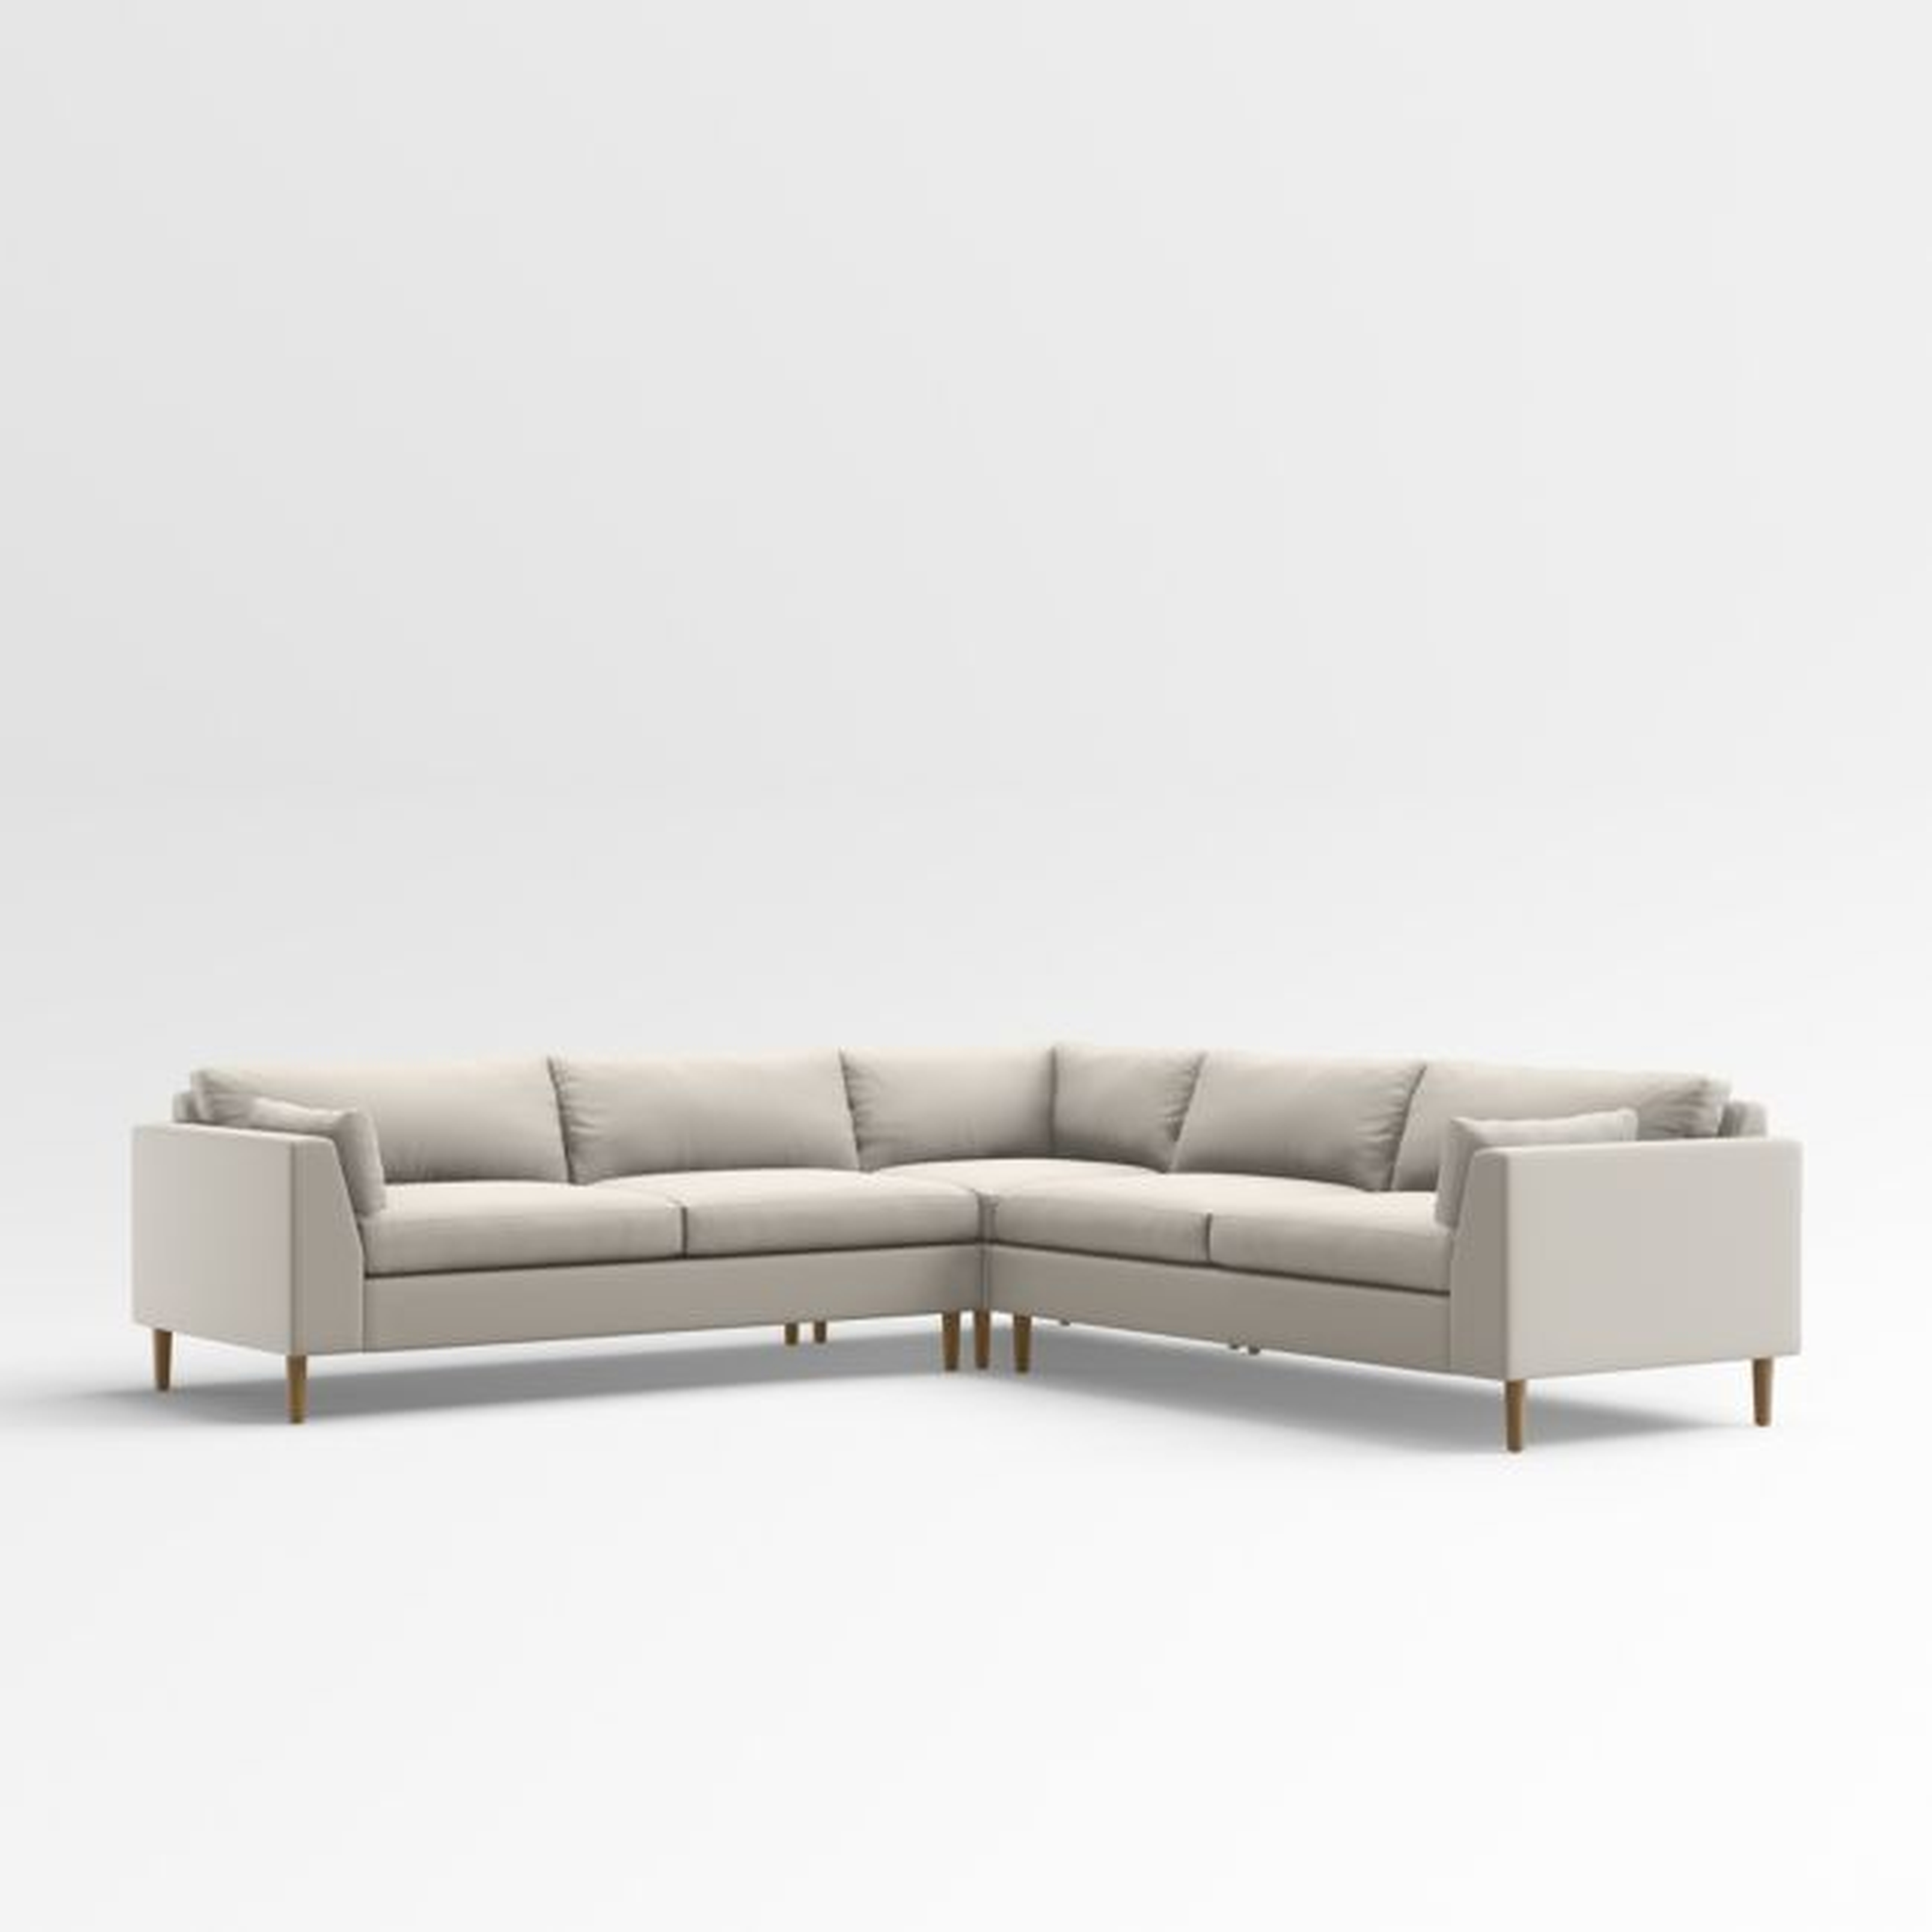 Avondale Wood Leg 3-Piece Sectional Sofa - Crate and Barrel